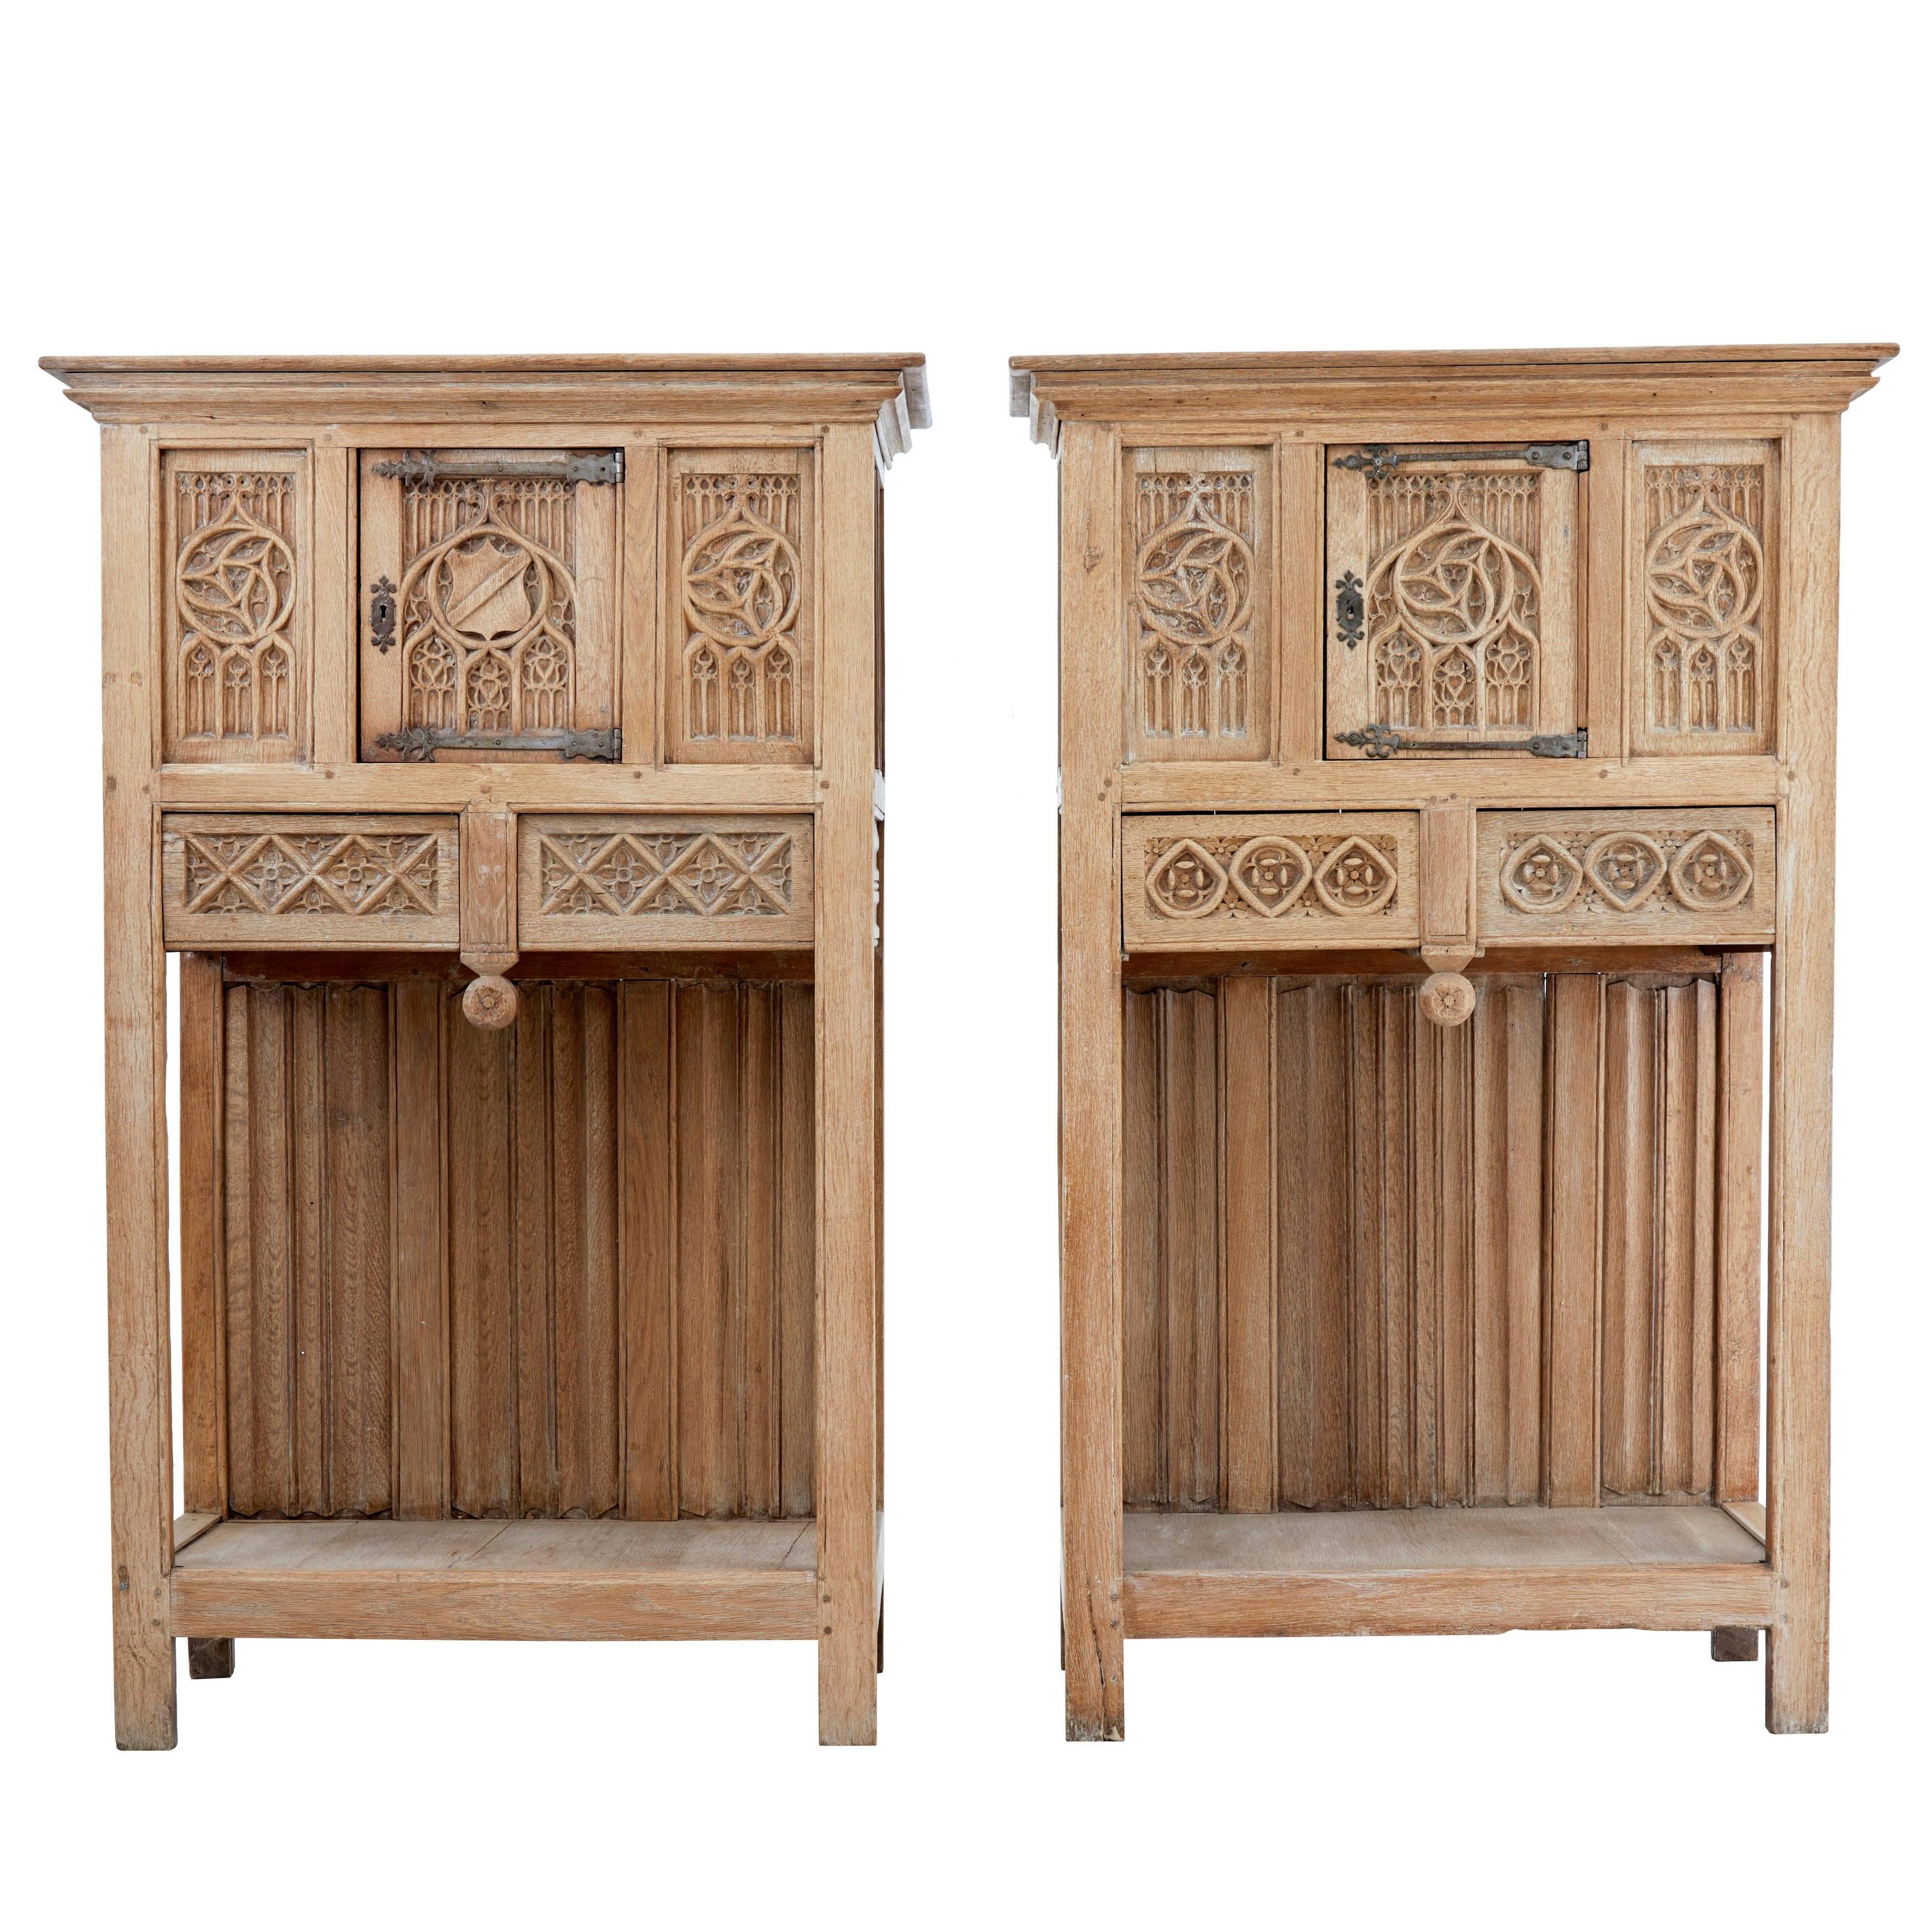 Pair of 19th Century Gothic Revival Carved Oak Cabinet on Stands